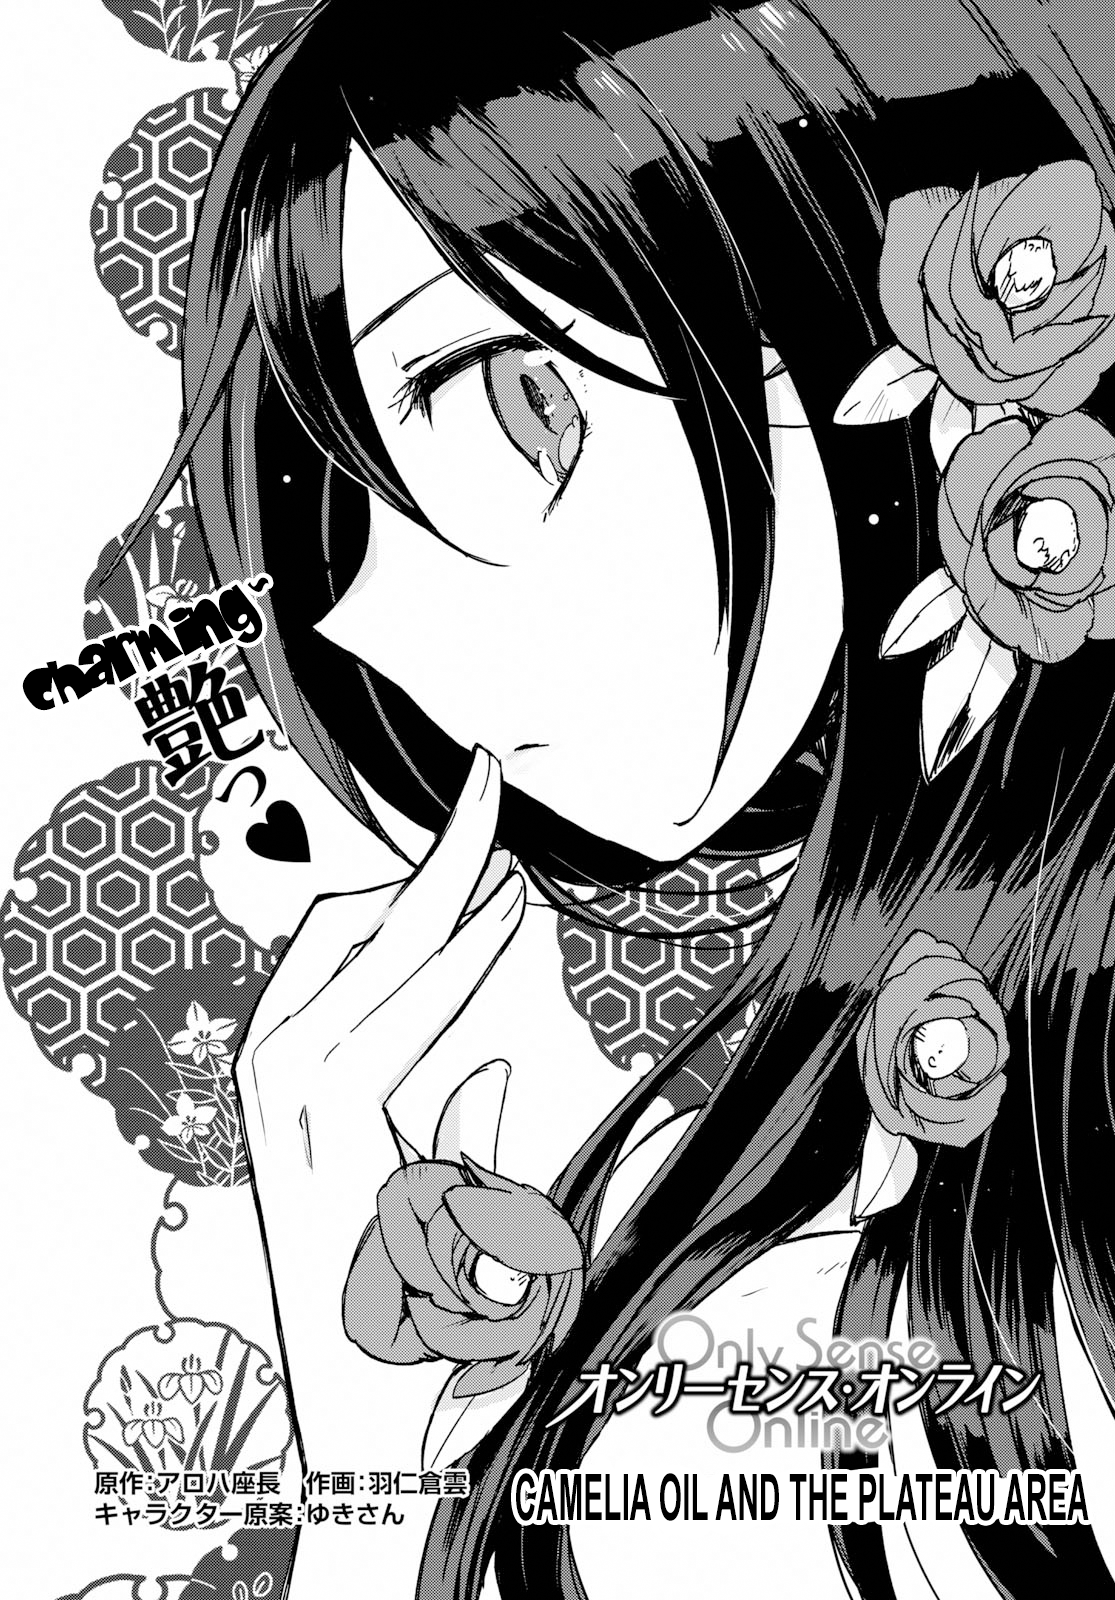 Only Sense Online Vol.11 Chapter 63: Camellia Oil And The Plateau Area - Picture 1